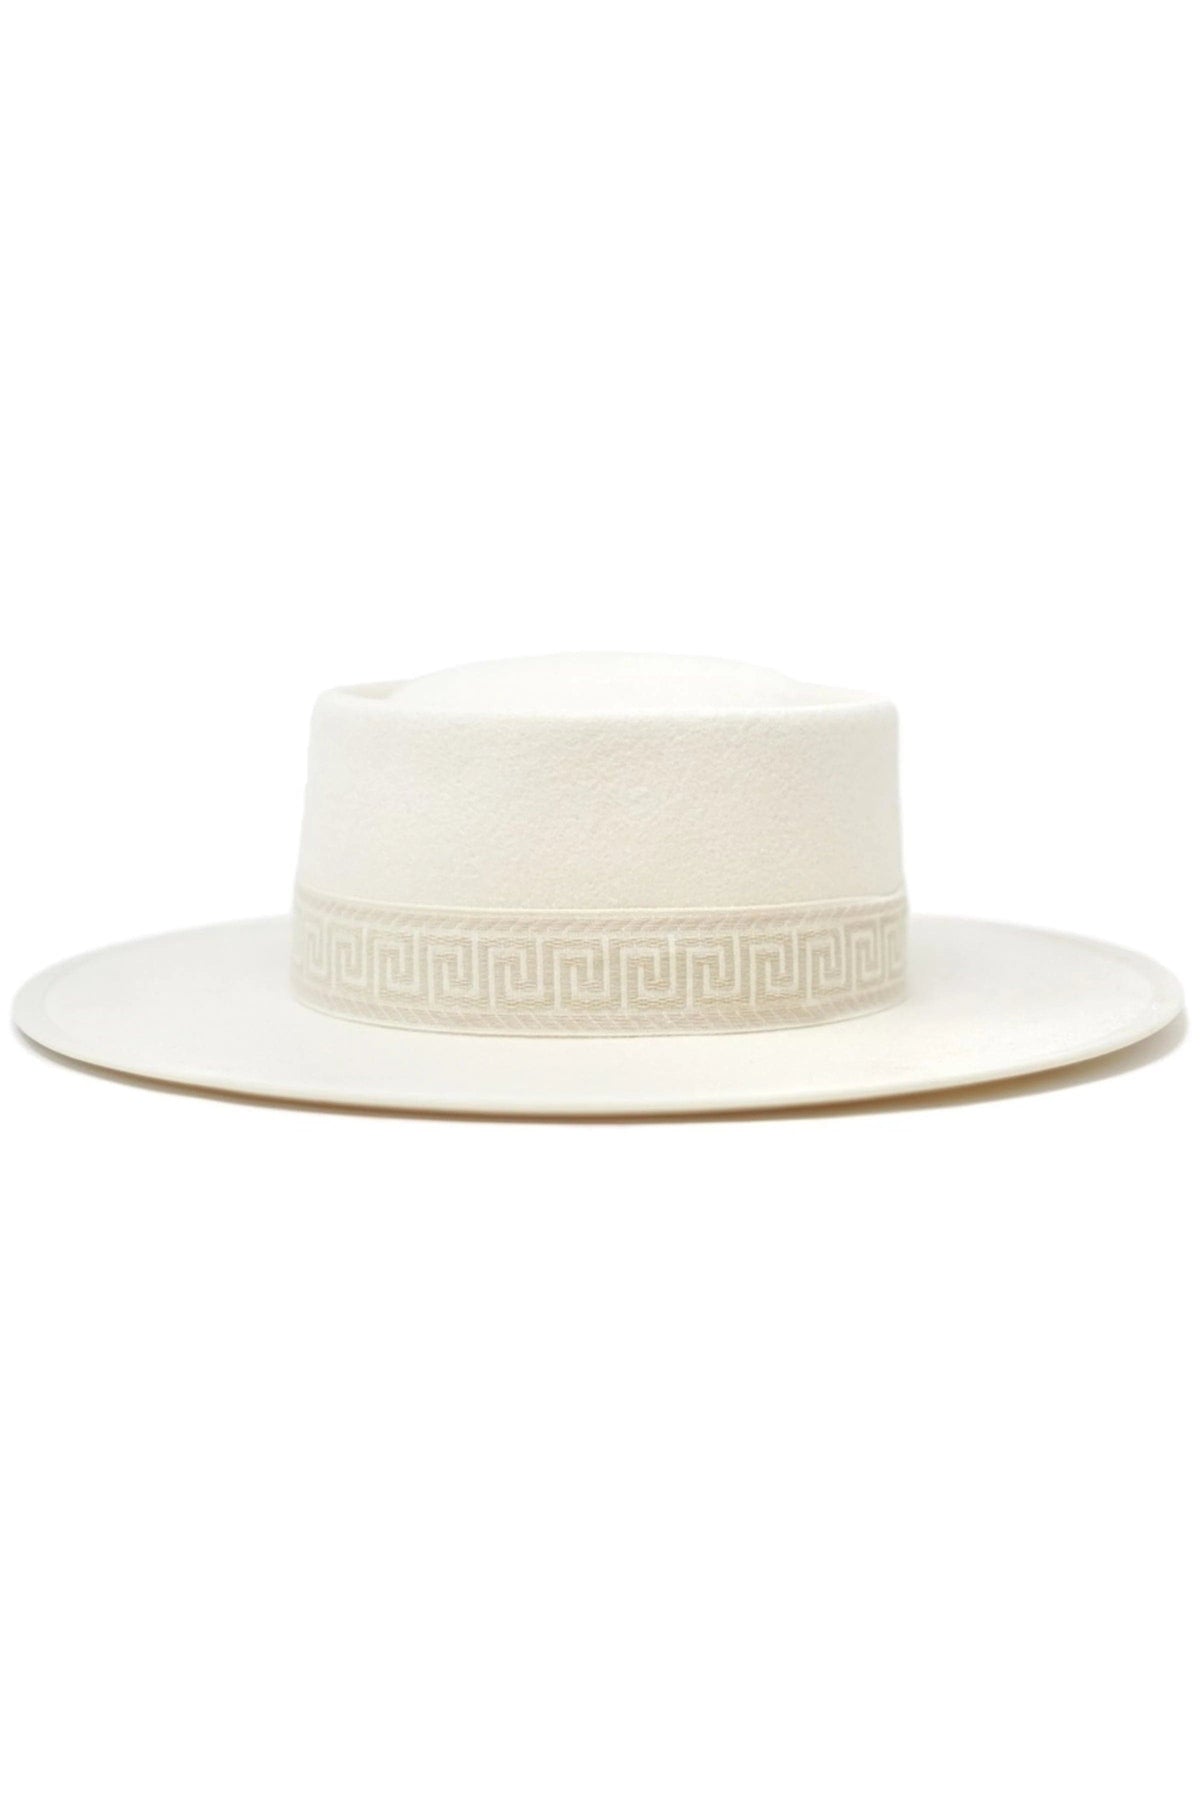 CLEO Boater Hat by Olive &amp; Pique - Hats - Blooming Daily